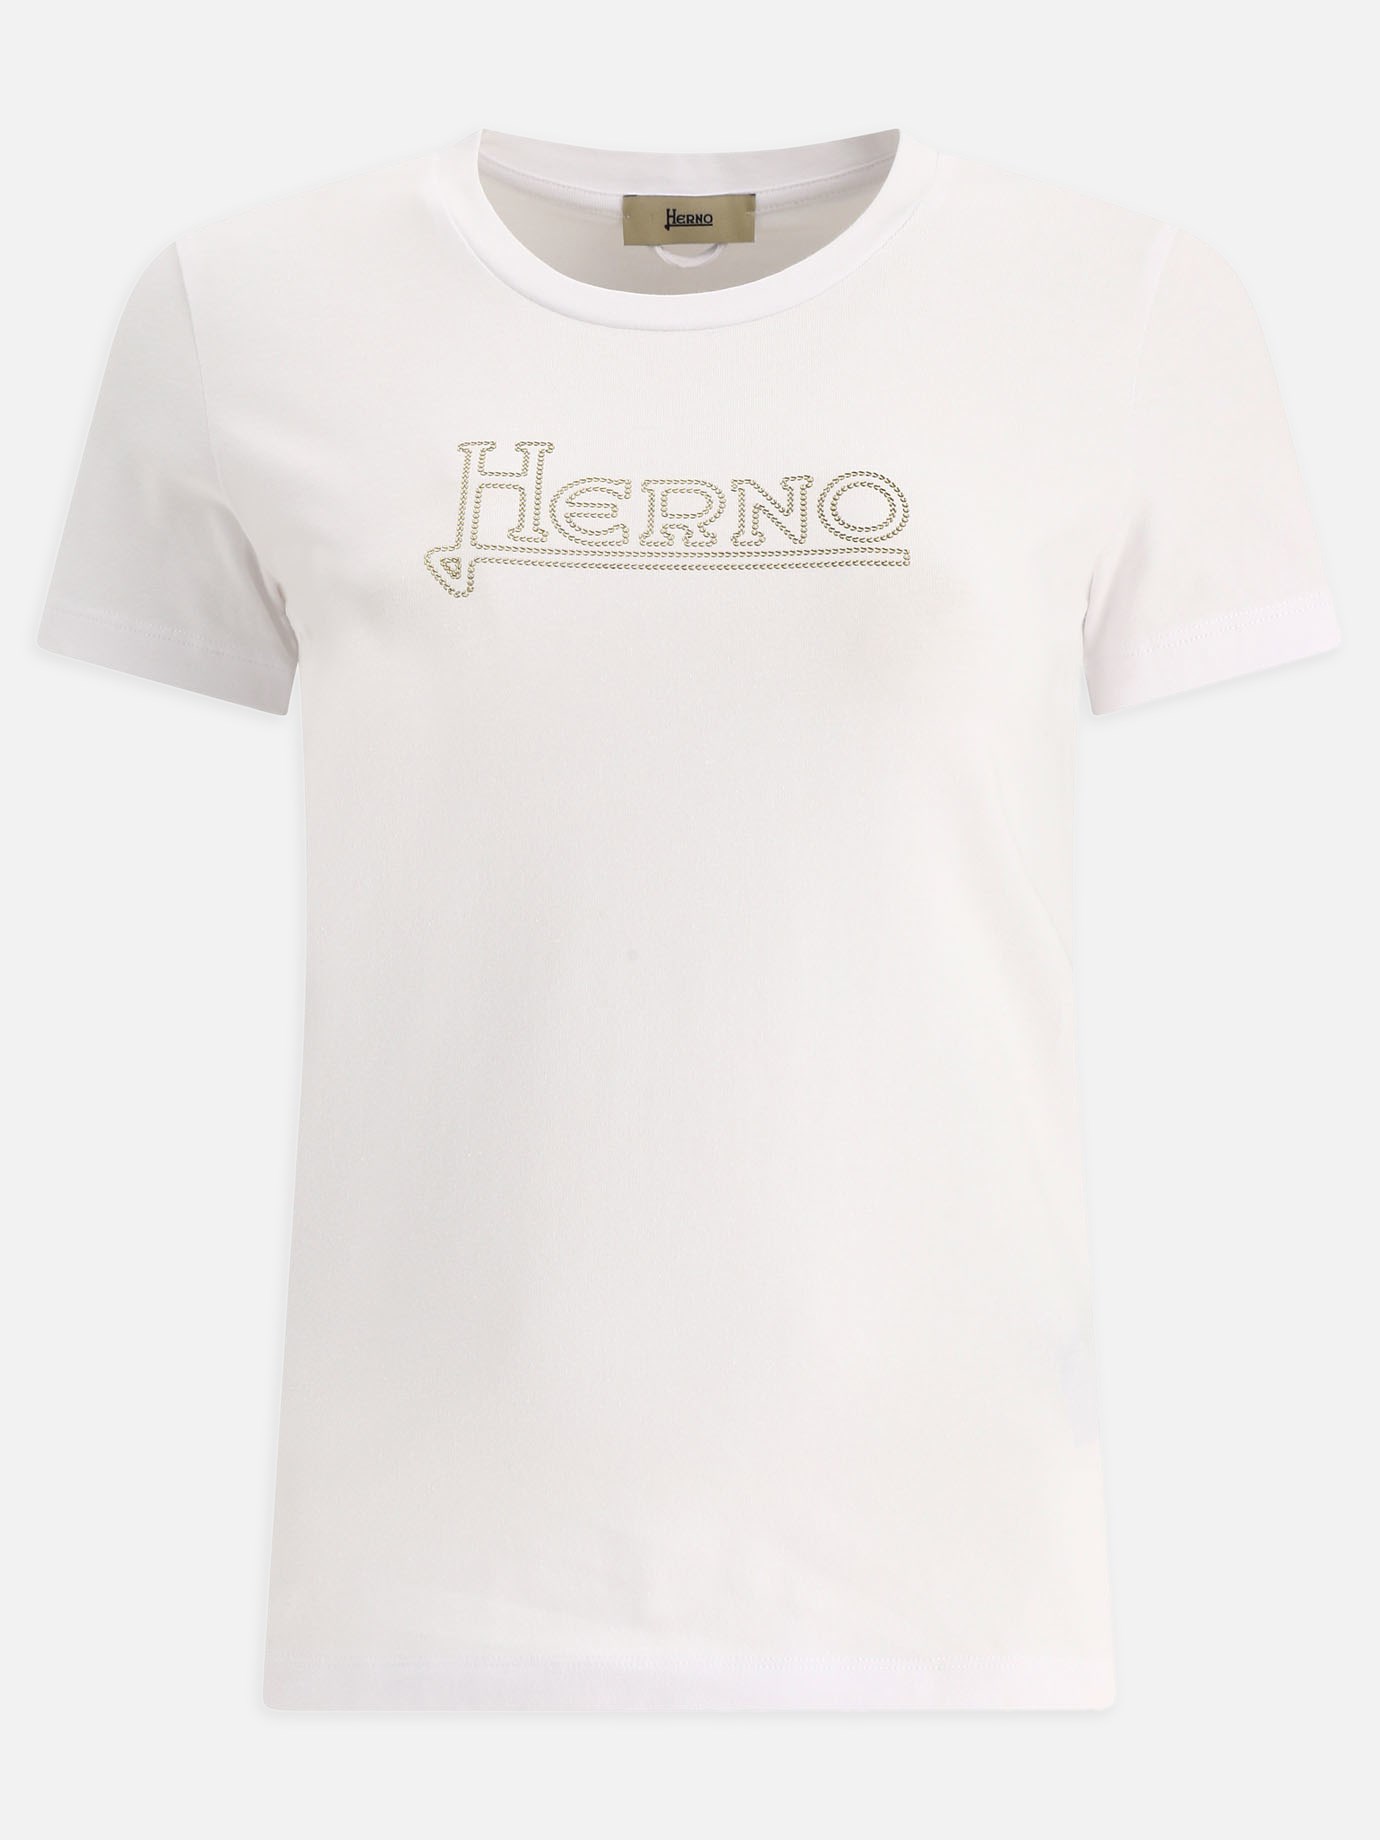 T-shirt  Stitches  by Herno